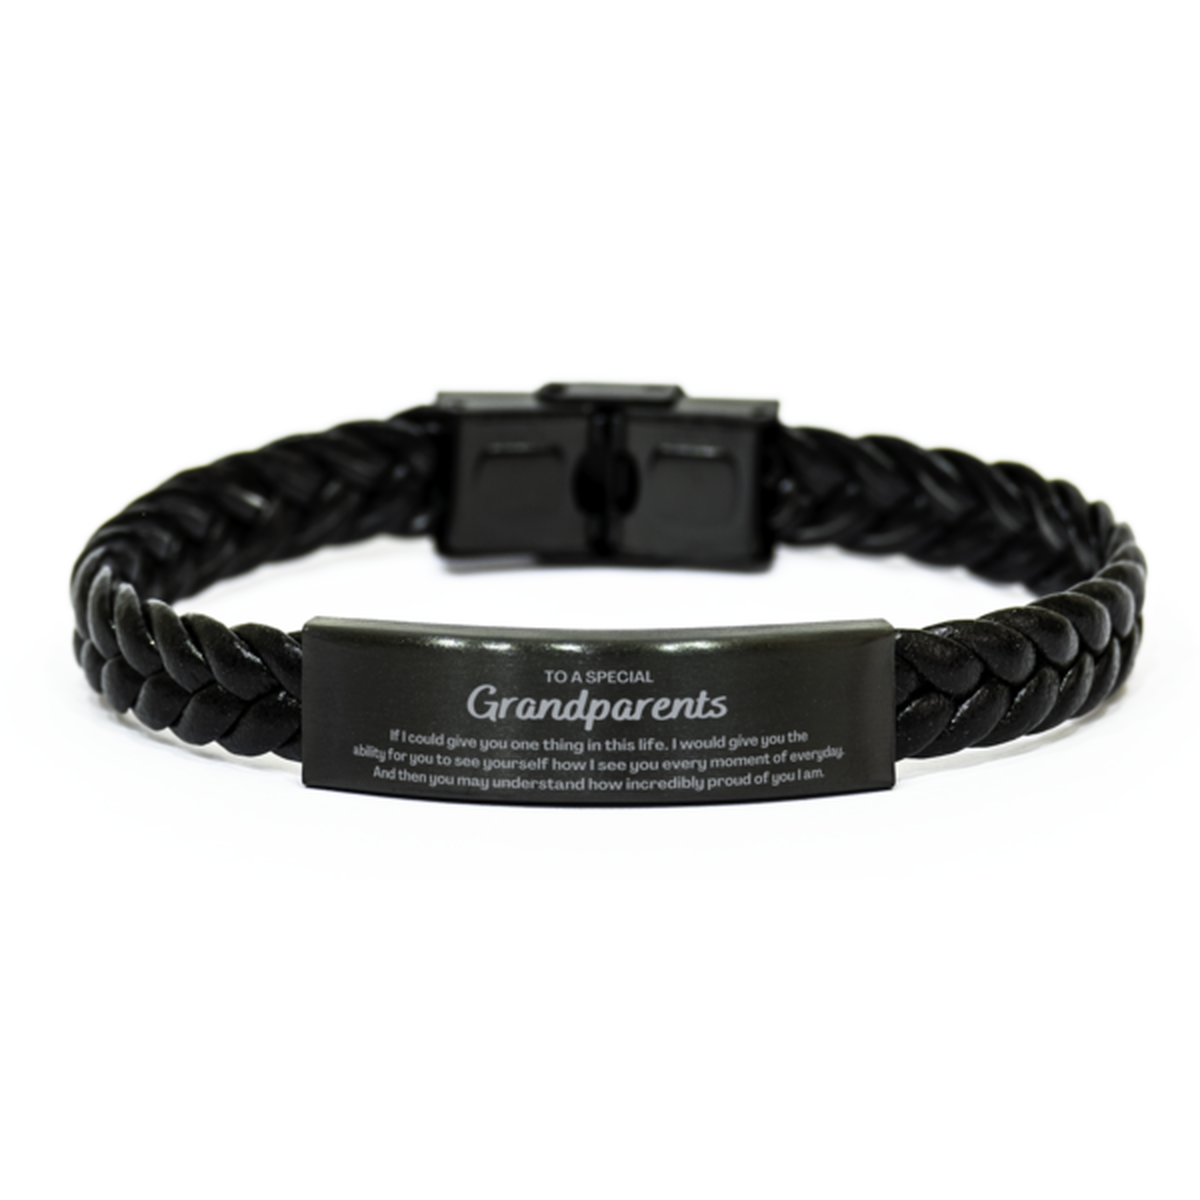 To My Grandparents Braided Leather Bracelet, Gifts For Grandparents Engraved, Inspirational Gifts for Christmas Birthday, Epic Gifts for Grandparents To A Special Grandparents how incredibly proud of you I am